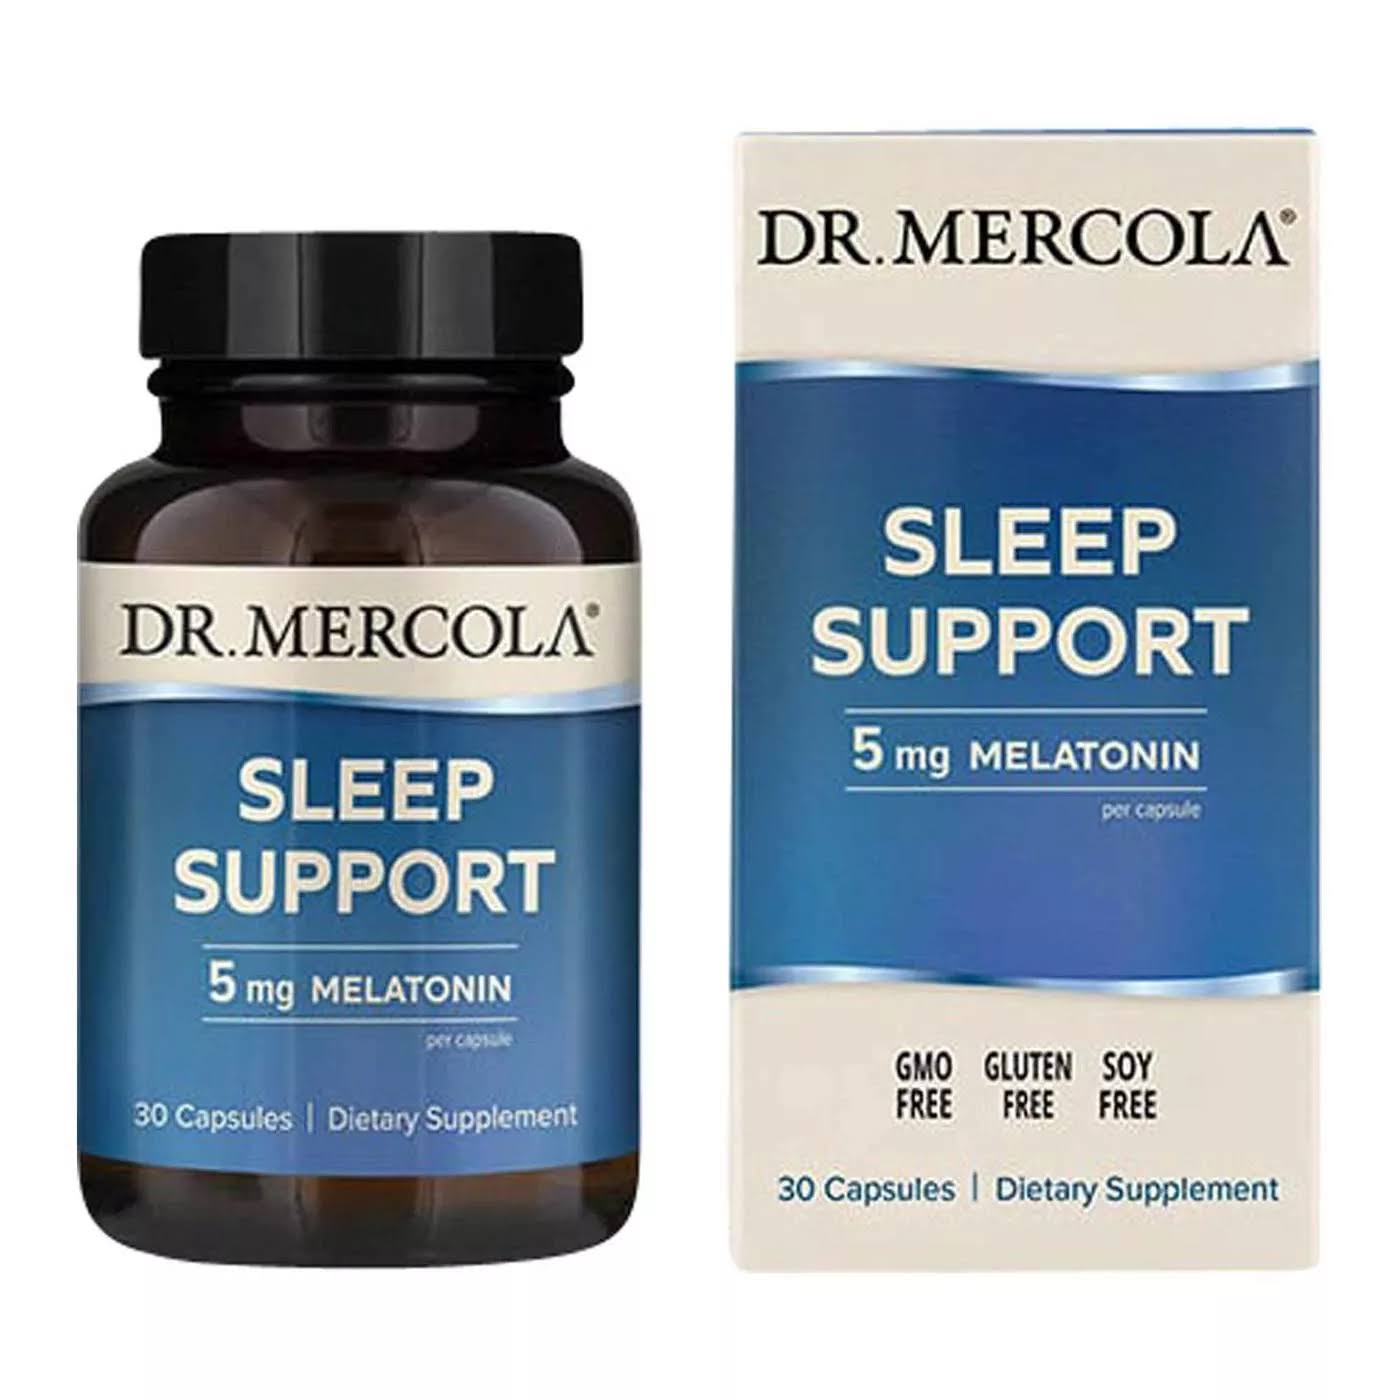 Dr. Mercola, Sleep Support, 5 mg, 30 Capsules